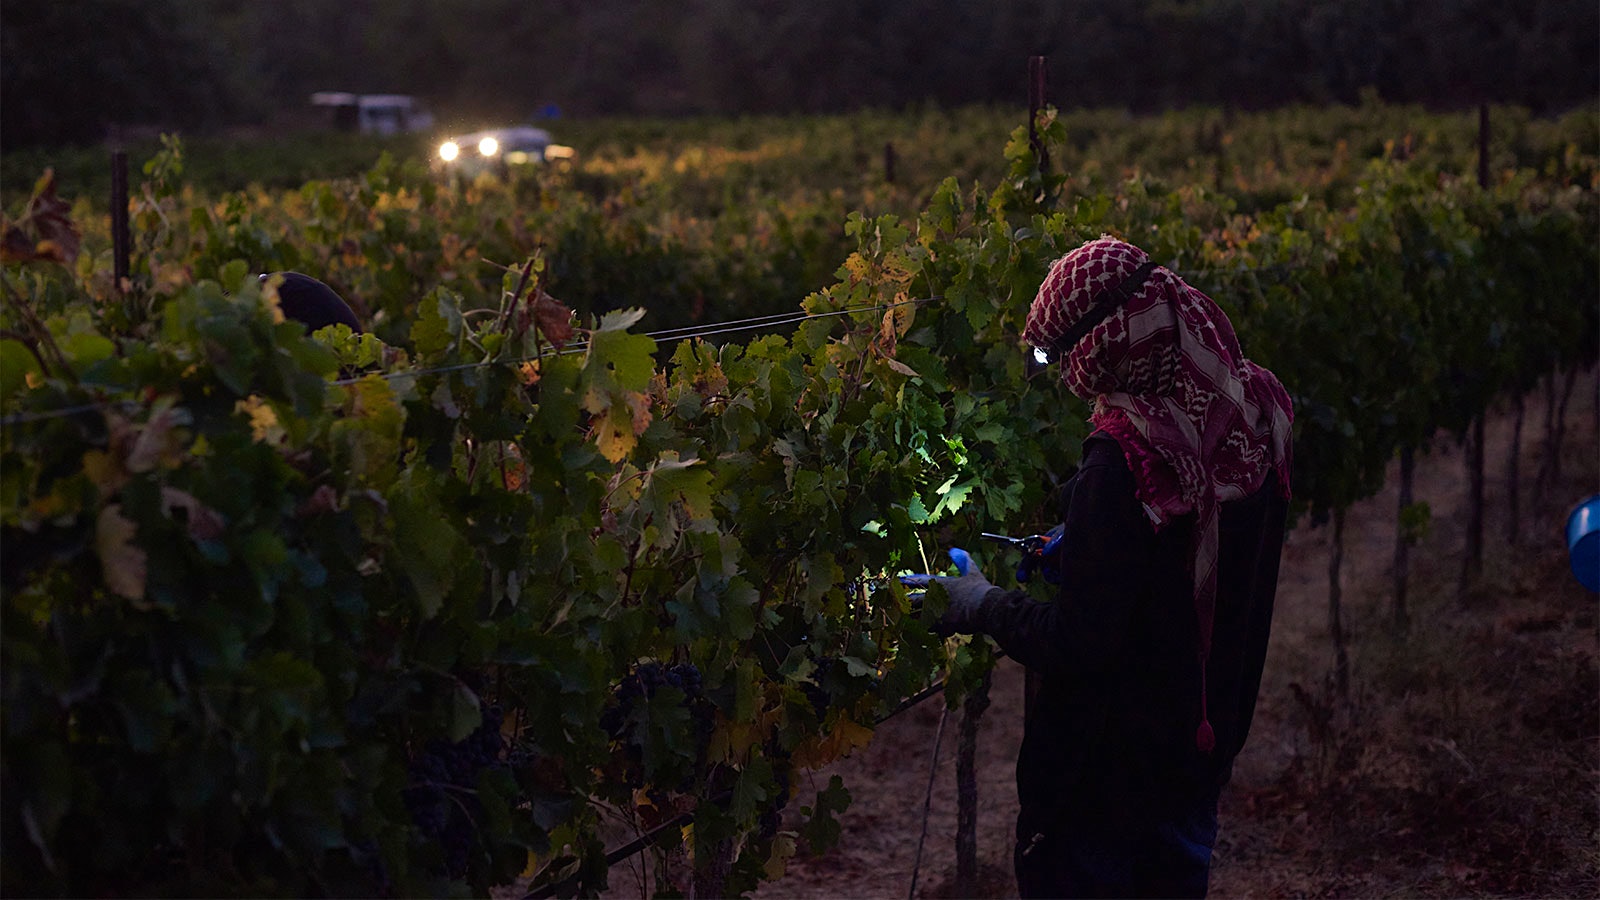  Worker picking grapes at Israeli winery